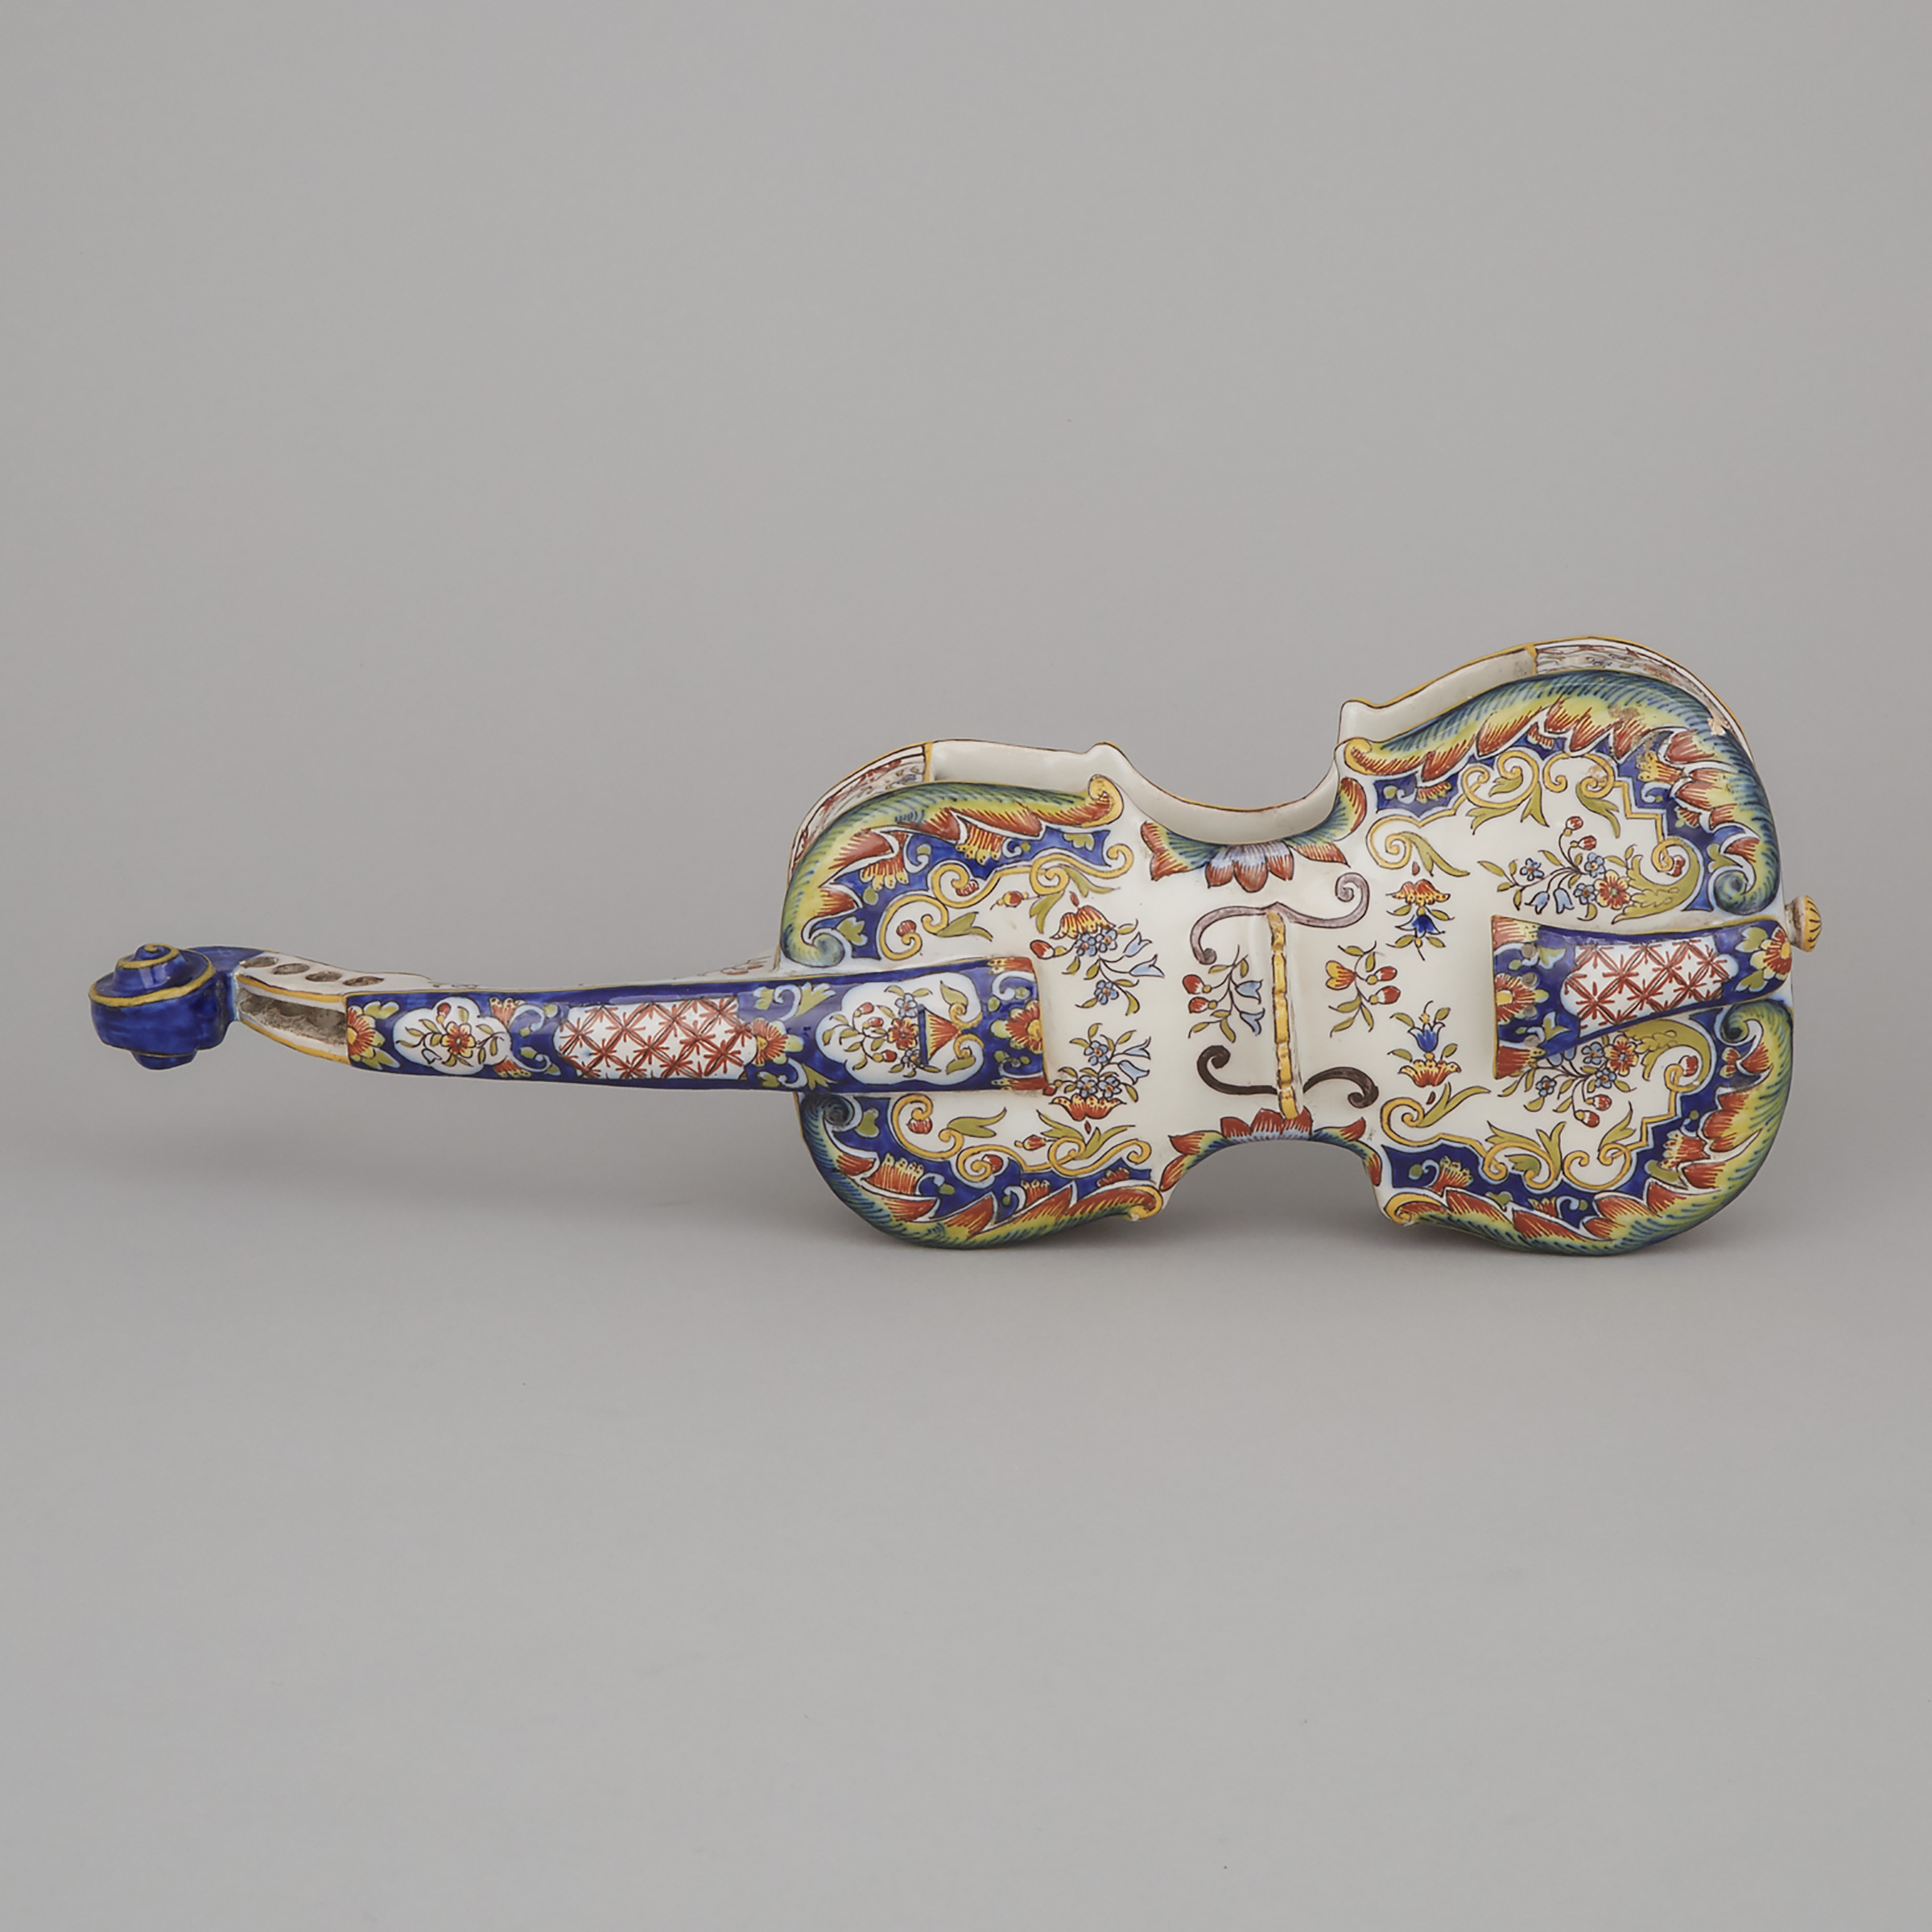 Delft Polychrome Decorated Violin-Form Wall Pocket, early 20th century